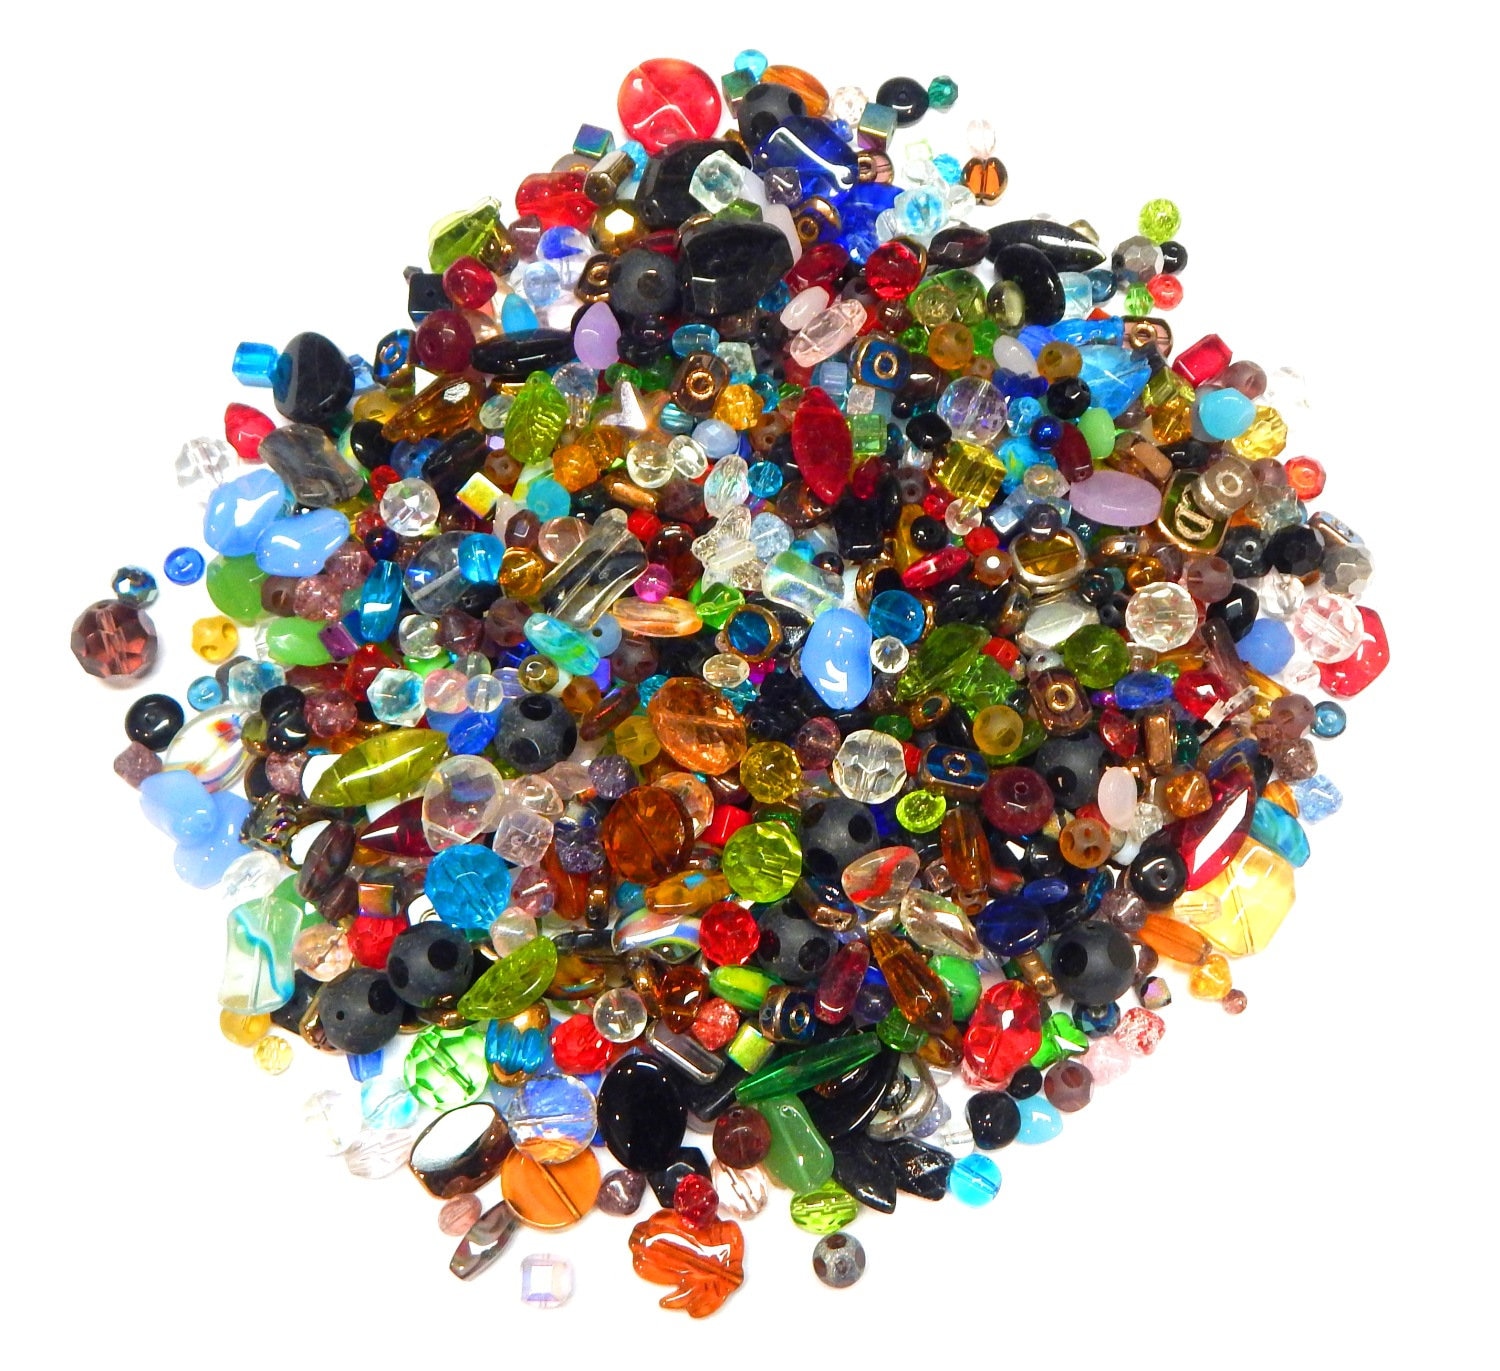 Bulk Lot Glass Beads for Jewelry Making Mix Cube Bicone Clear Glass Beads  10 lb